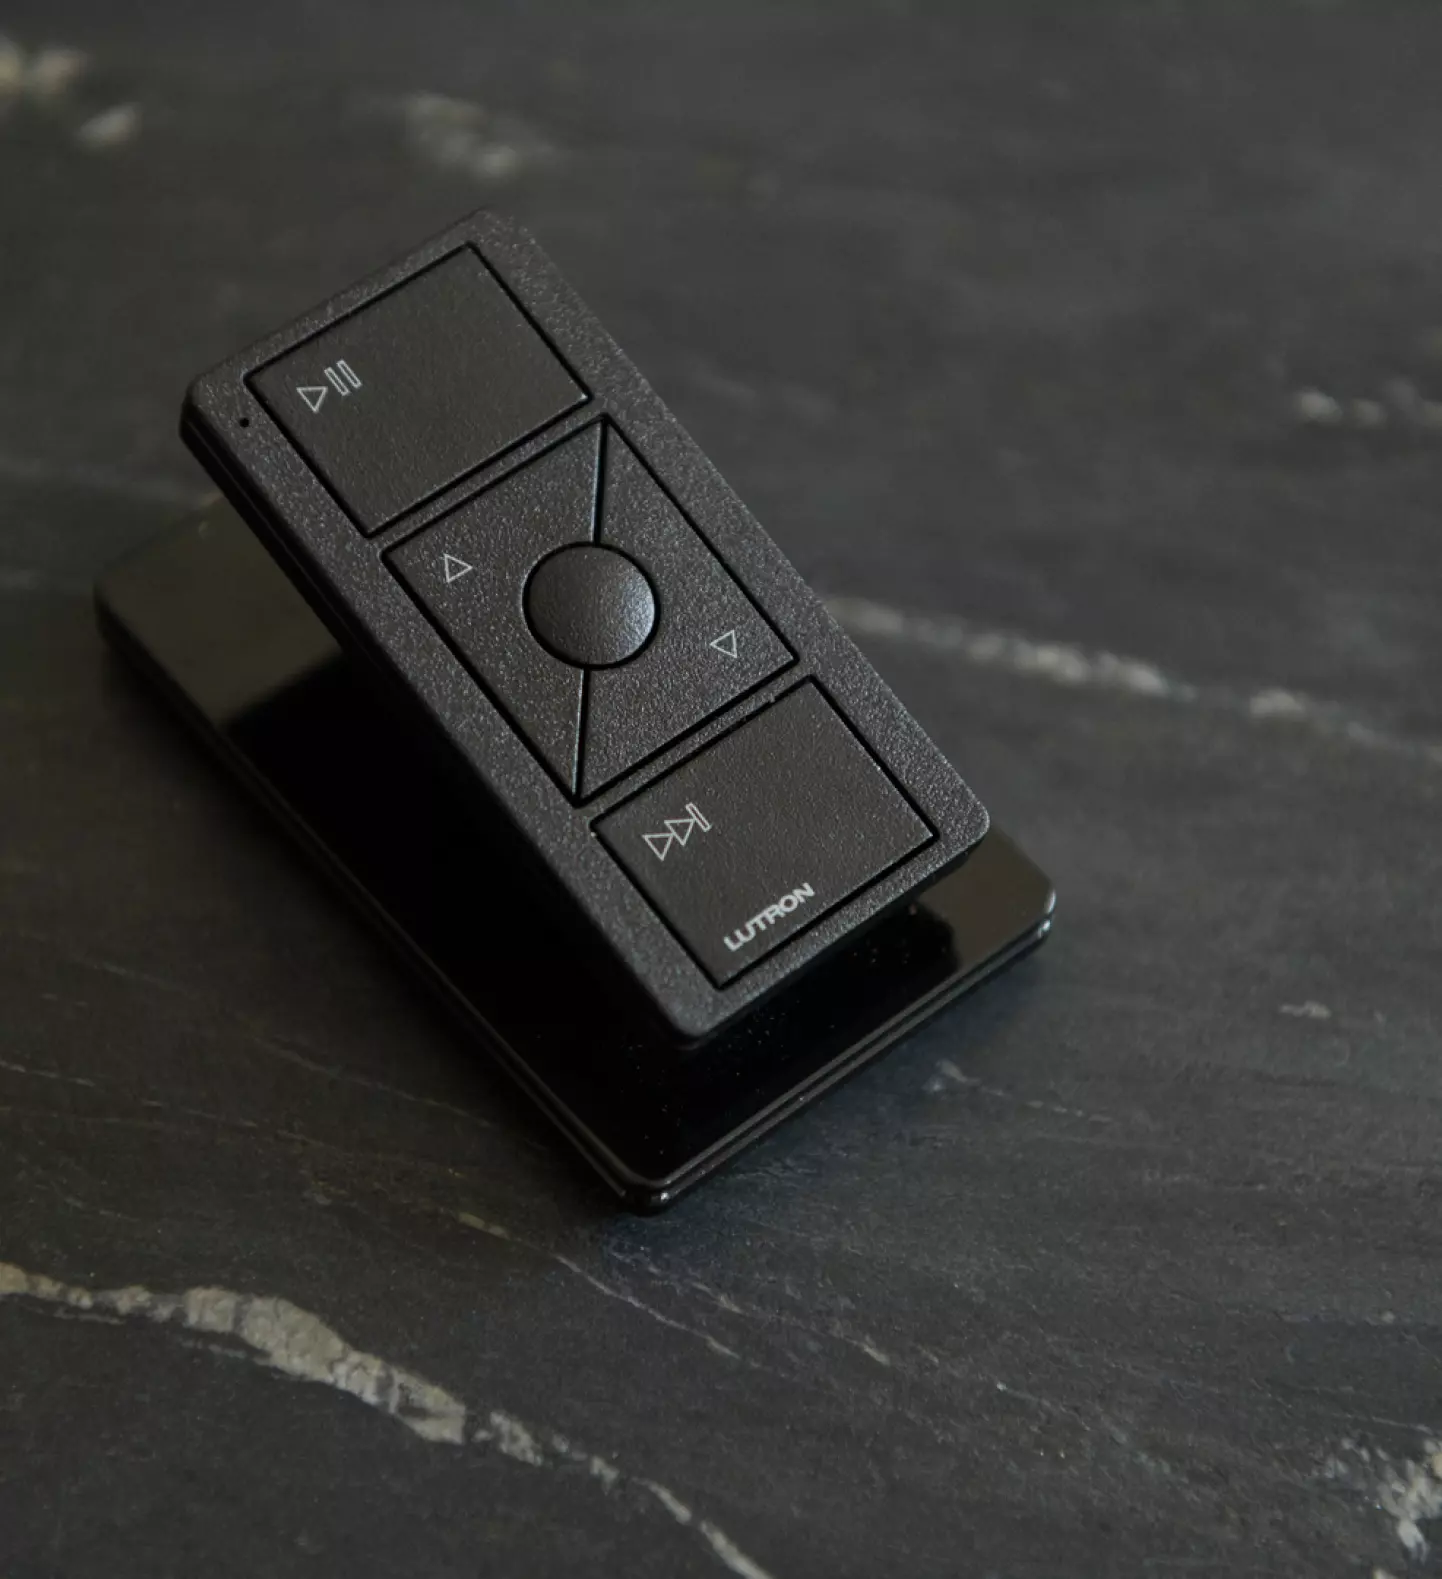 a black remote control on a black surface